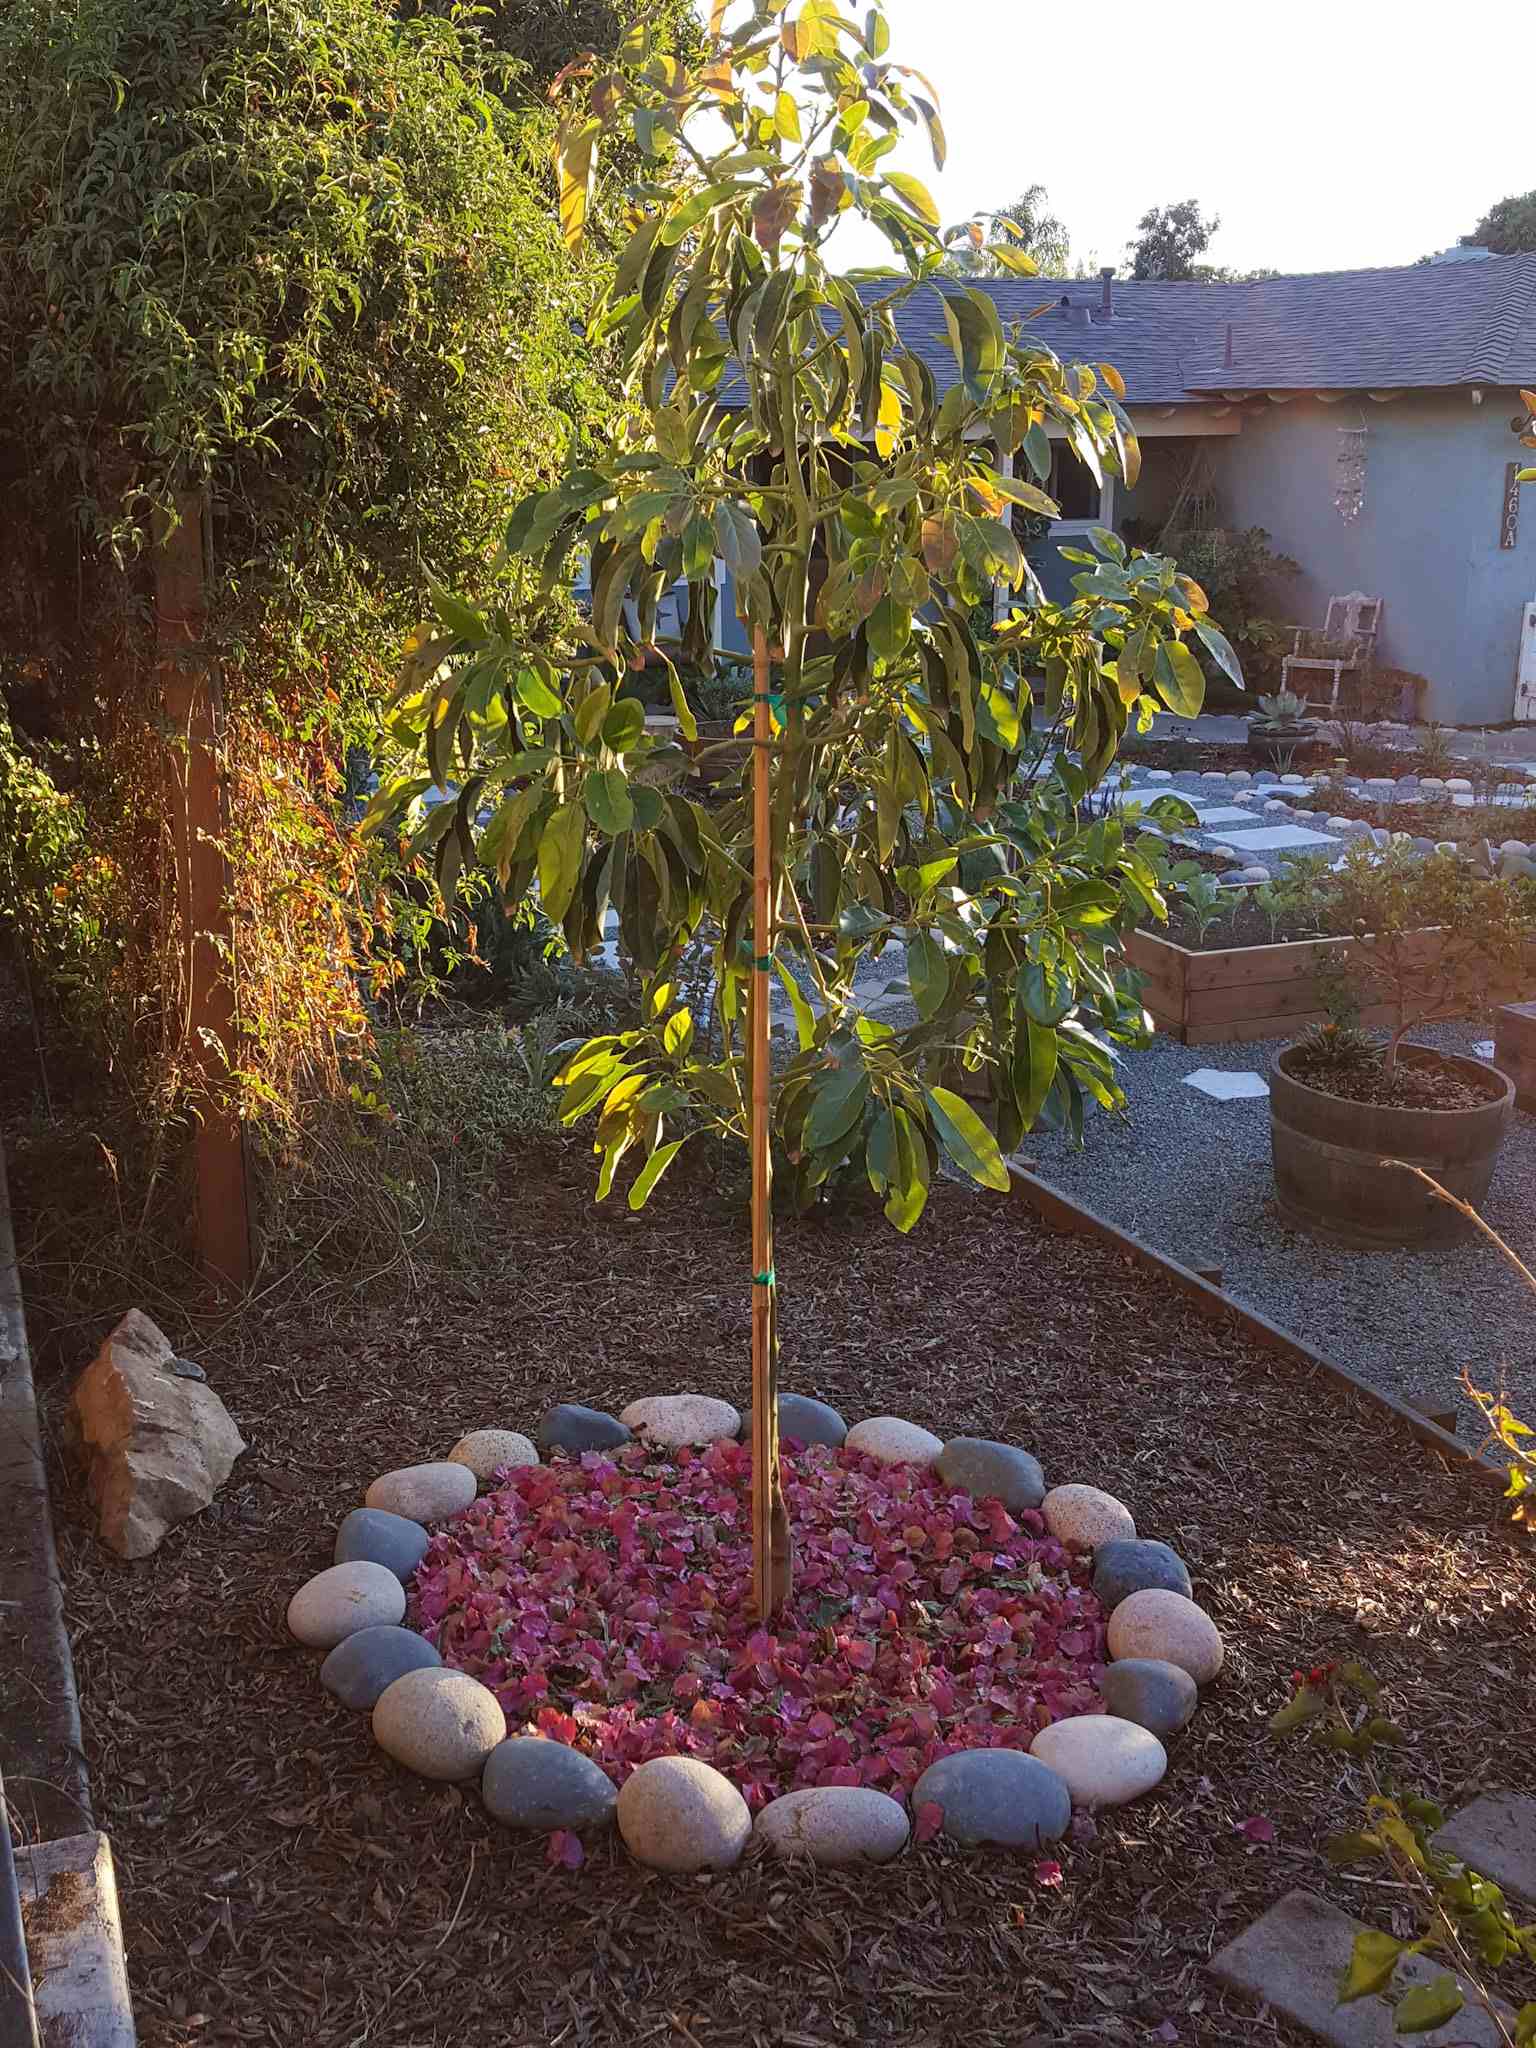 A young avocado tree is shown after it was recently planted. The rootball of the tree has a circle or river rock around  it with a mulch of colorful fallen leaves from nearby plants. 